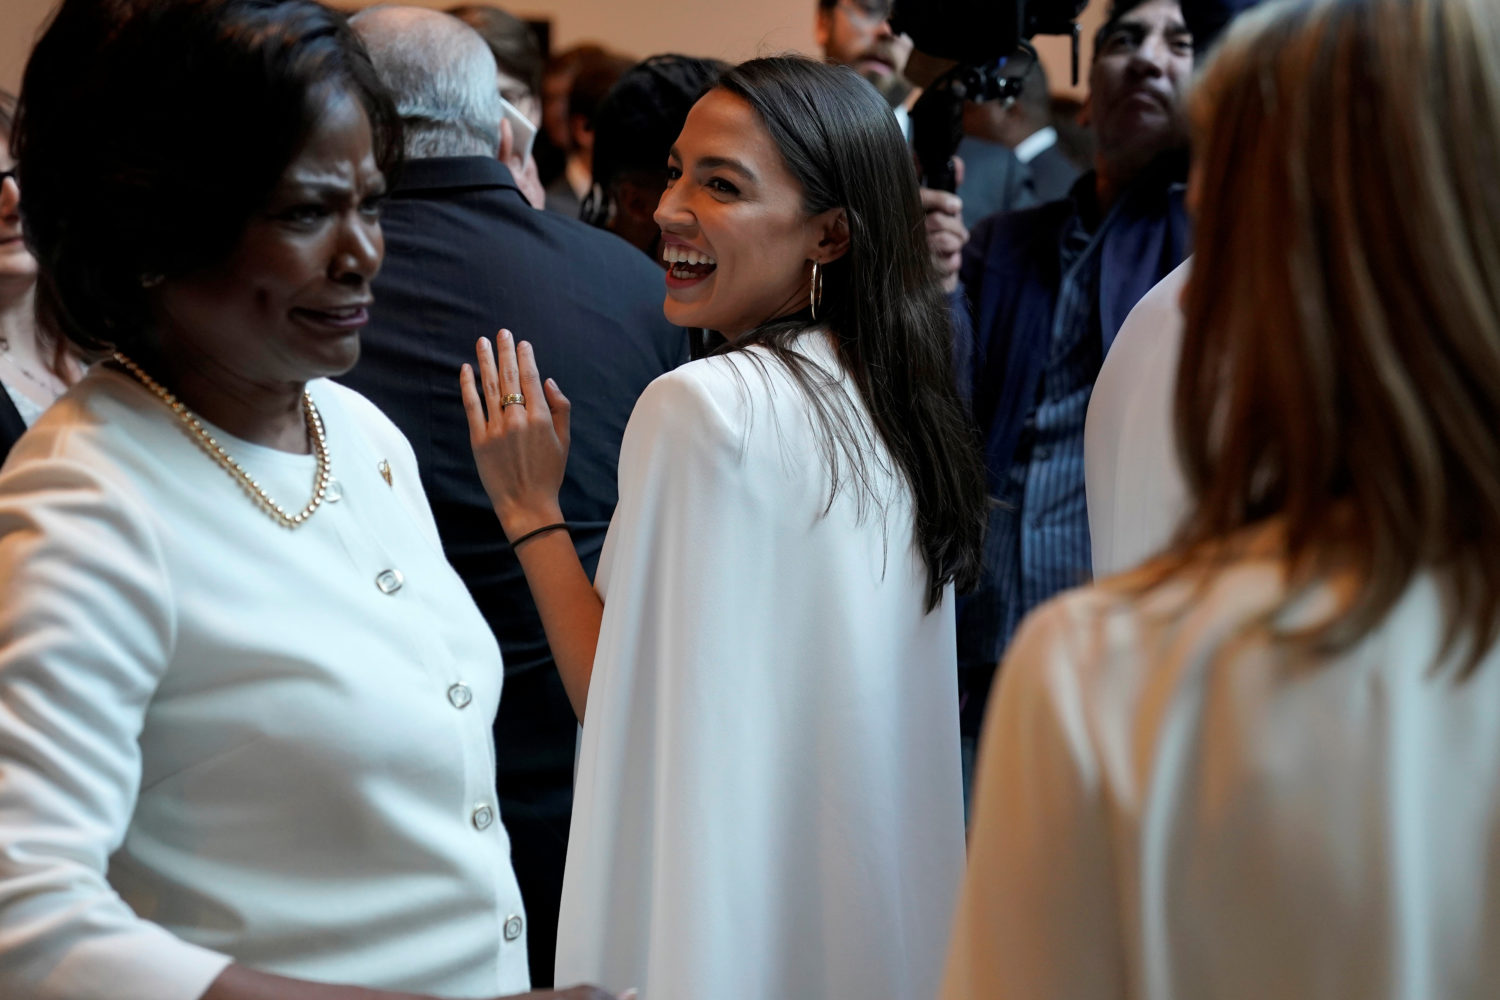 Rep. Alexandria Ocasio Cortez (D-NY) speaks with Democratic women House members during a photo-op recognizing suffragettes before the State of Union address on Capitol Hill in Washington, U.S., February 5, 2019. REUTERS/Joshua Roberts